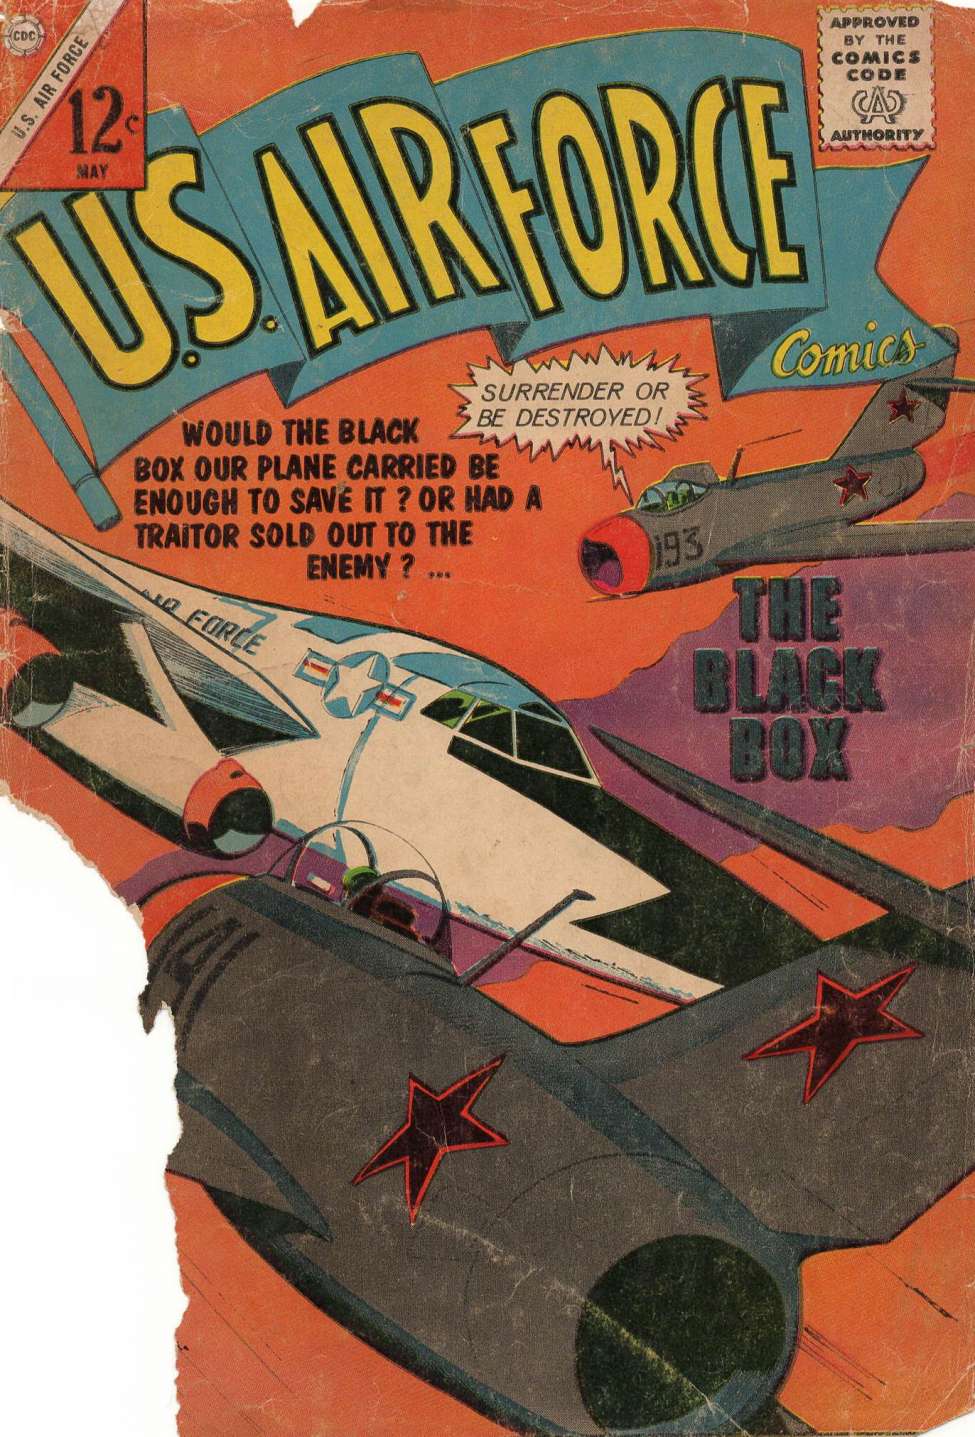 Book Cover For U.S. Air Force Comics 27 - Version 1